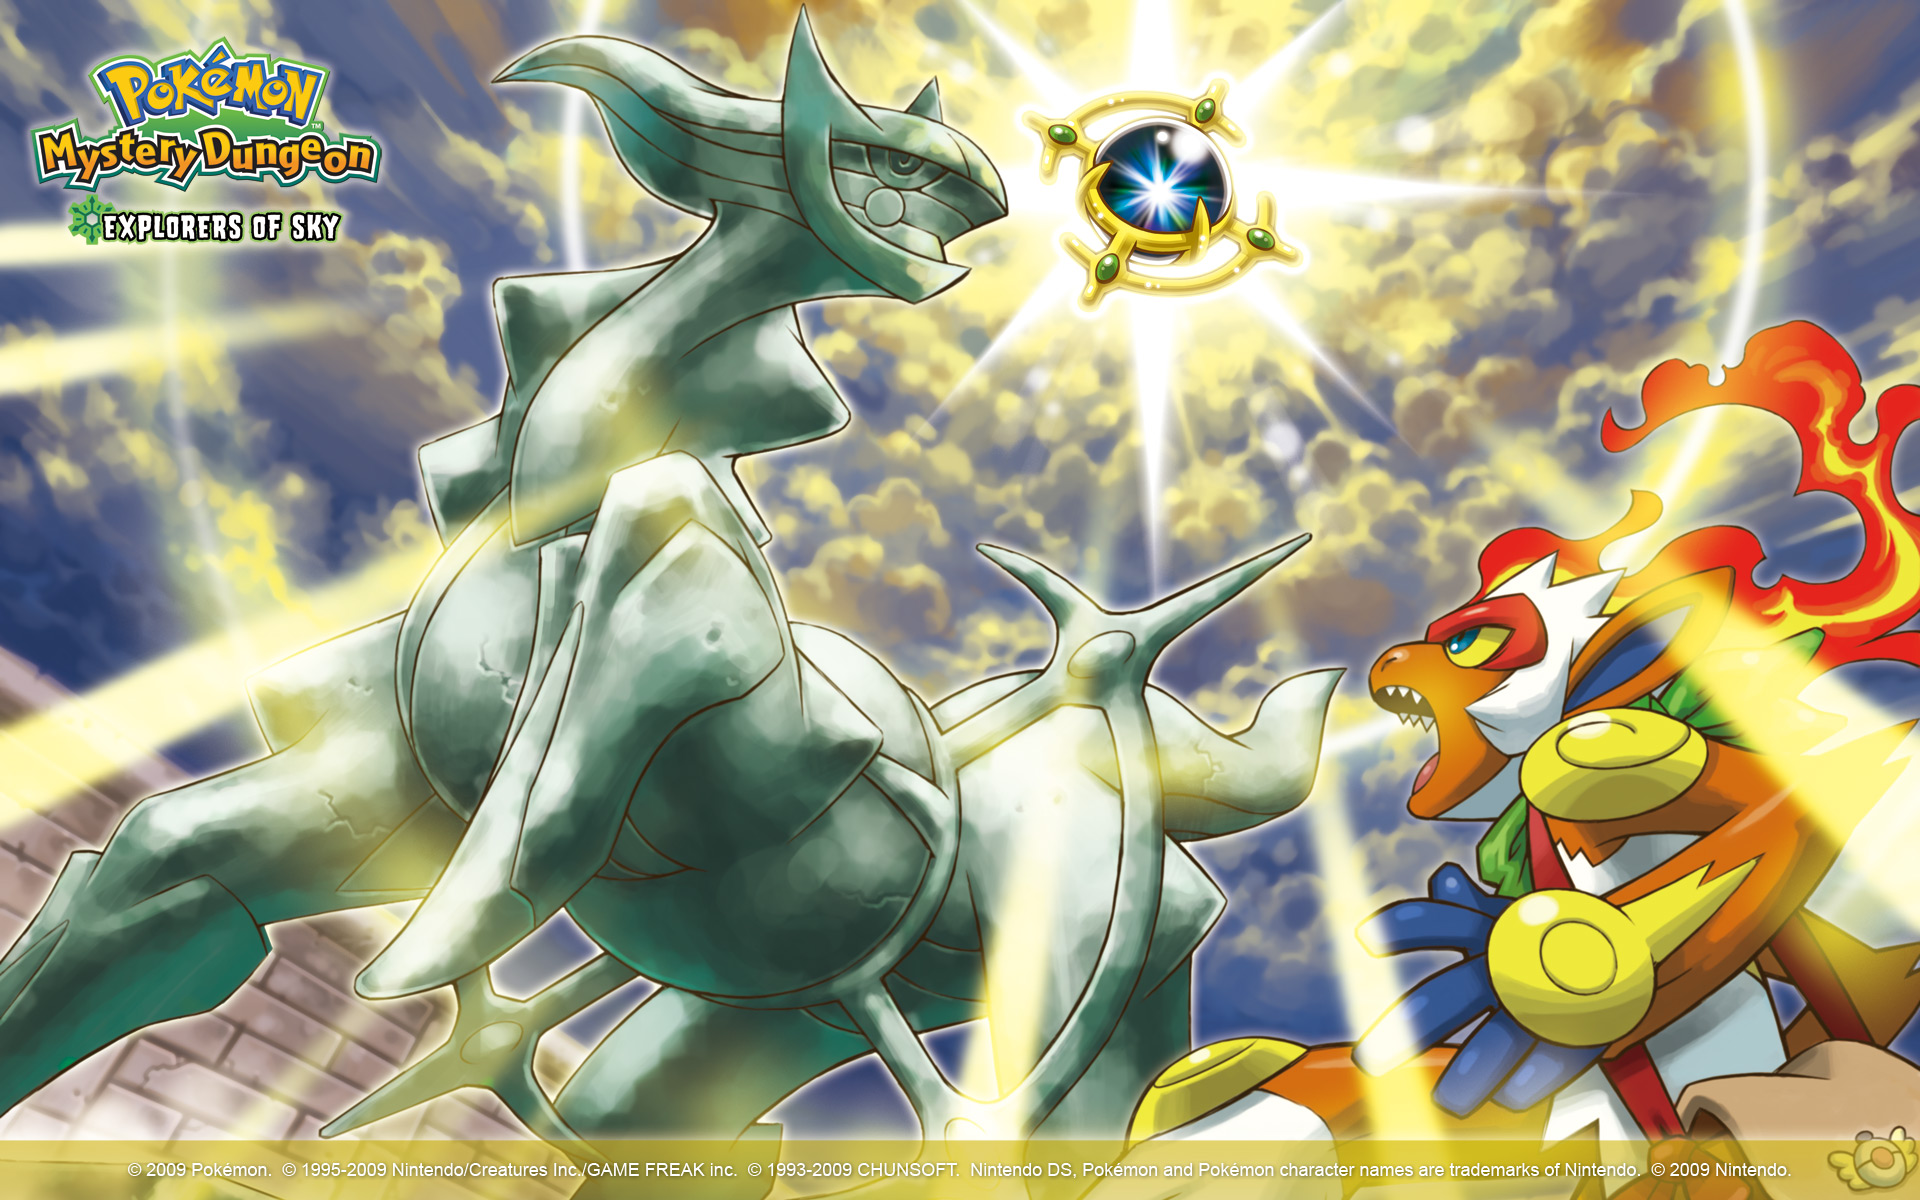 Pokémon Mystery Dungeon: Explorers Of Sky wallpapers for desktop, download  free Pokémon Mystery Dungeon: Explorers Of Sky pictures and backgrounds for  PC 